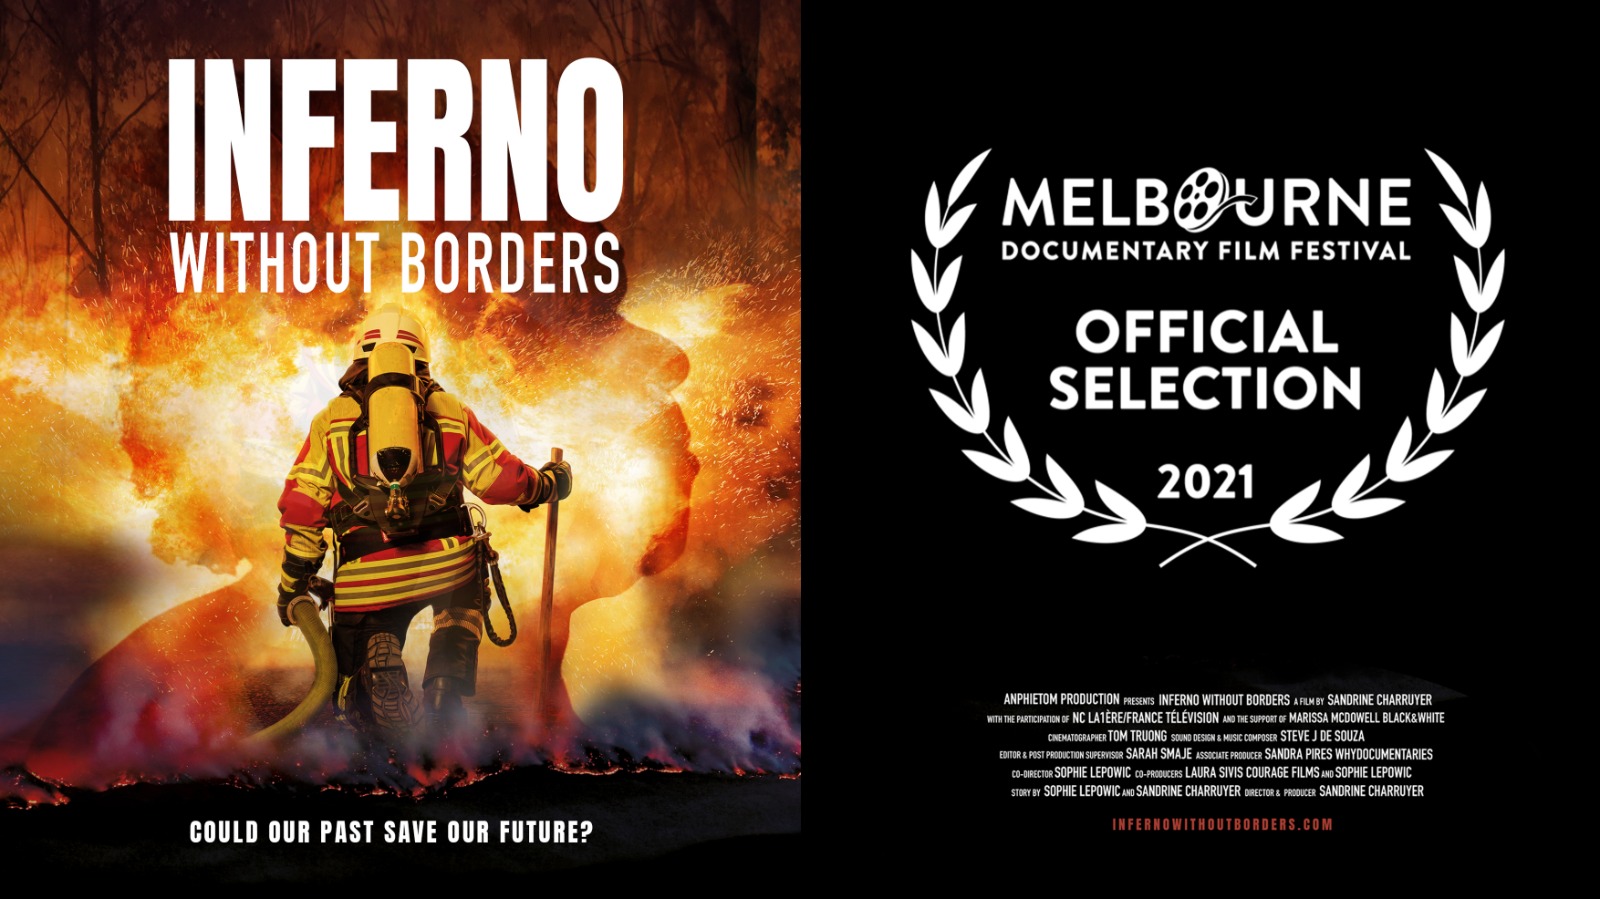 Inferno Without Borders